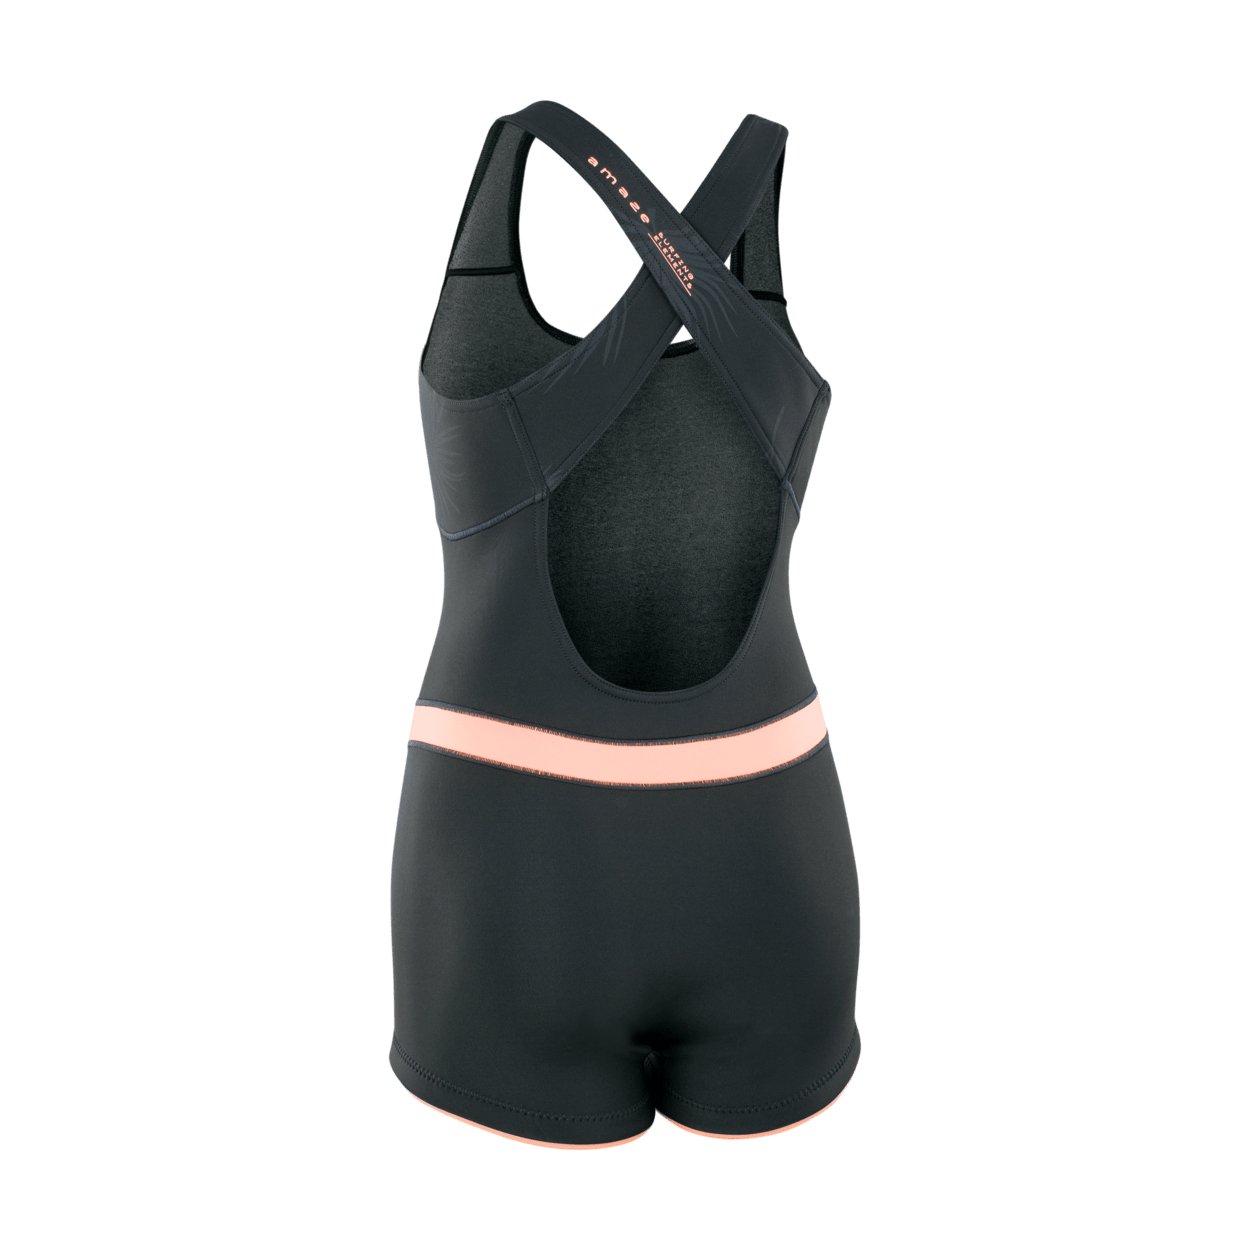 ION Women Wetsuit Amaze Shorty Crossback 1.5 2023 - Worthing Watersports - 9010583058344 - Wetsuits - ION Water